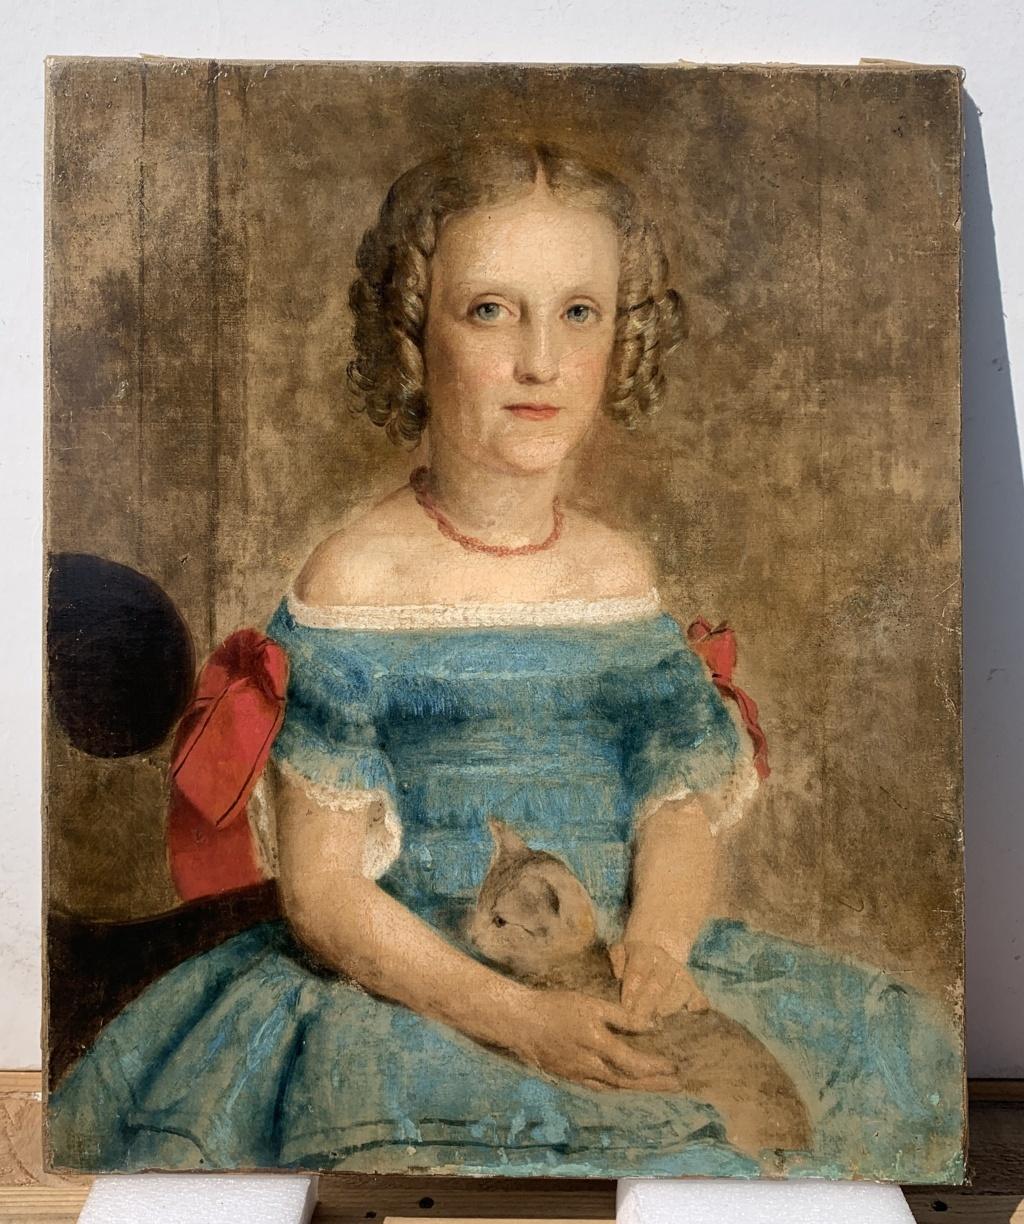 Late 19th century British figure painting - Girl’s portait with cat - English - Painting by Unknown